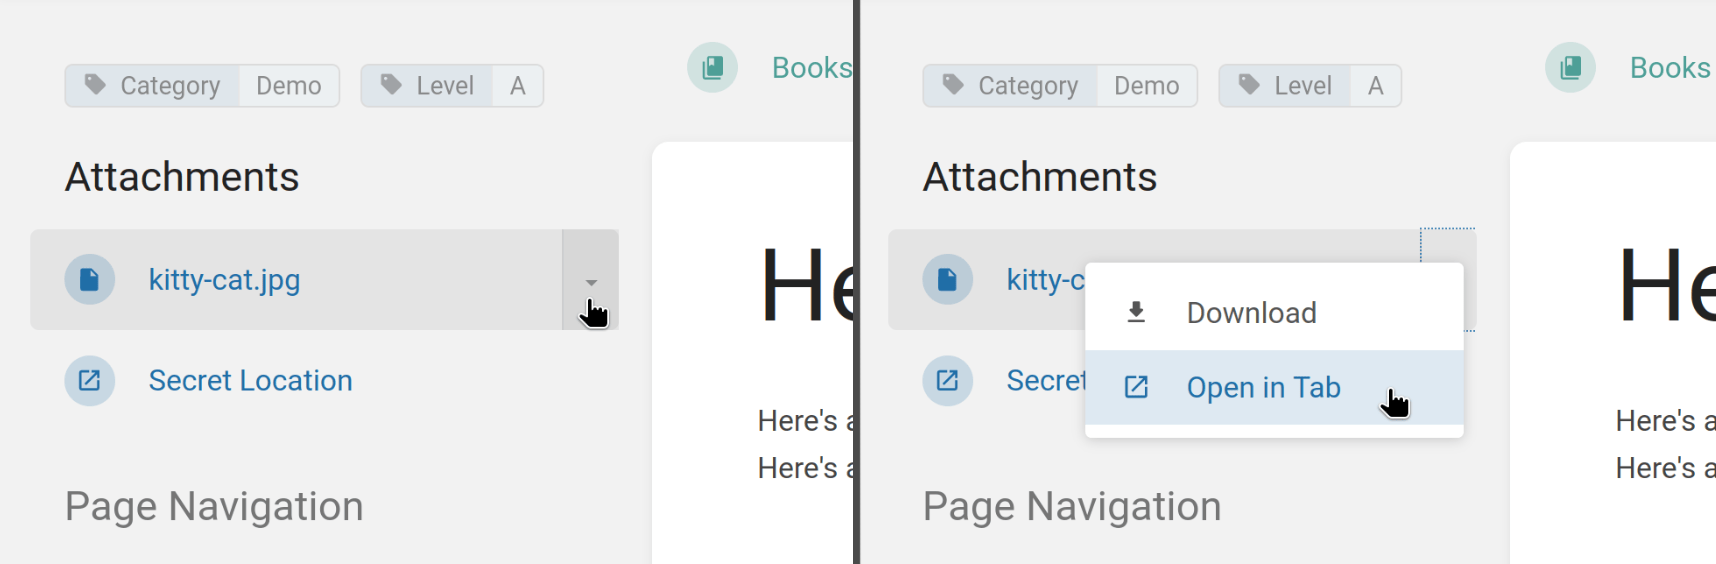 View of the sidebar when viewing a page with two attachments: a &ldquo;kitty-cat.jpg&rdquo; file attachment and &ldquo;Secret Location&rdquo; link attachment. There&rsquo;s also a view of the same but showing a dropdown menu on the right of the attachment, with &ldquo;Download&rdquo; and &ldquo;Open in Tab&rdquo; options